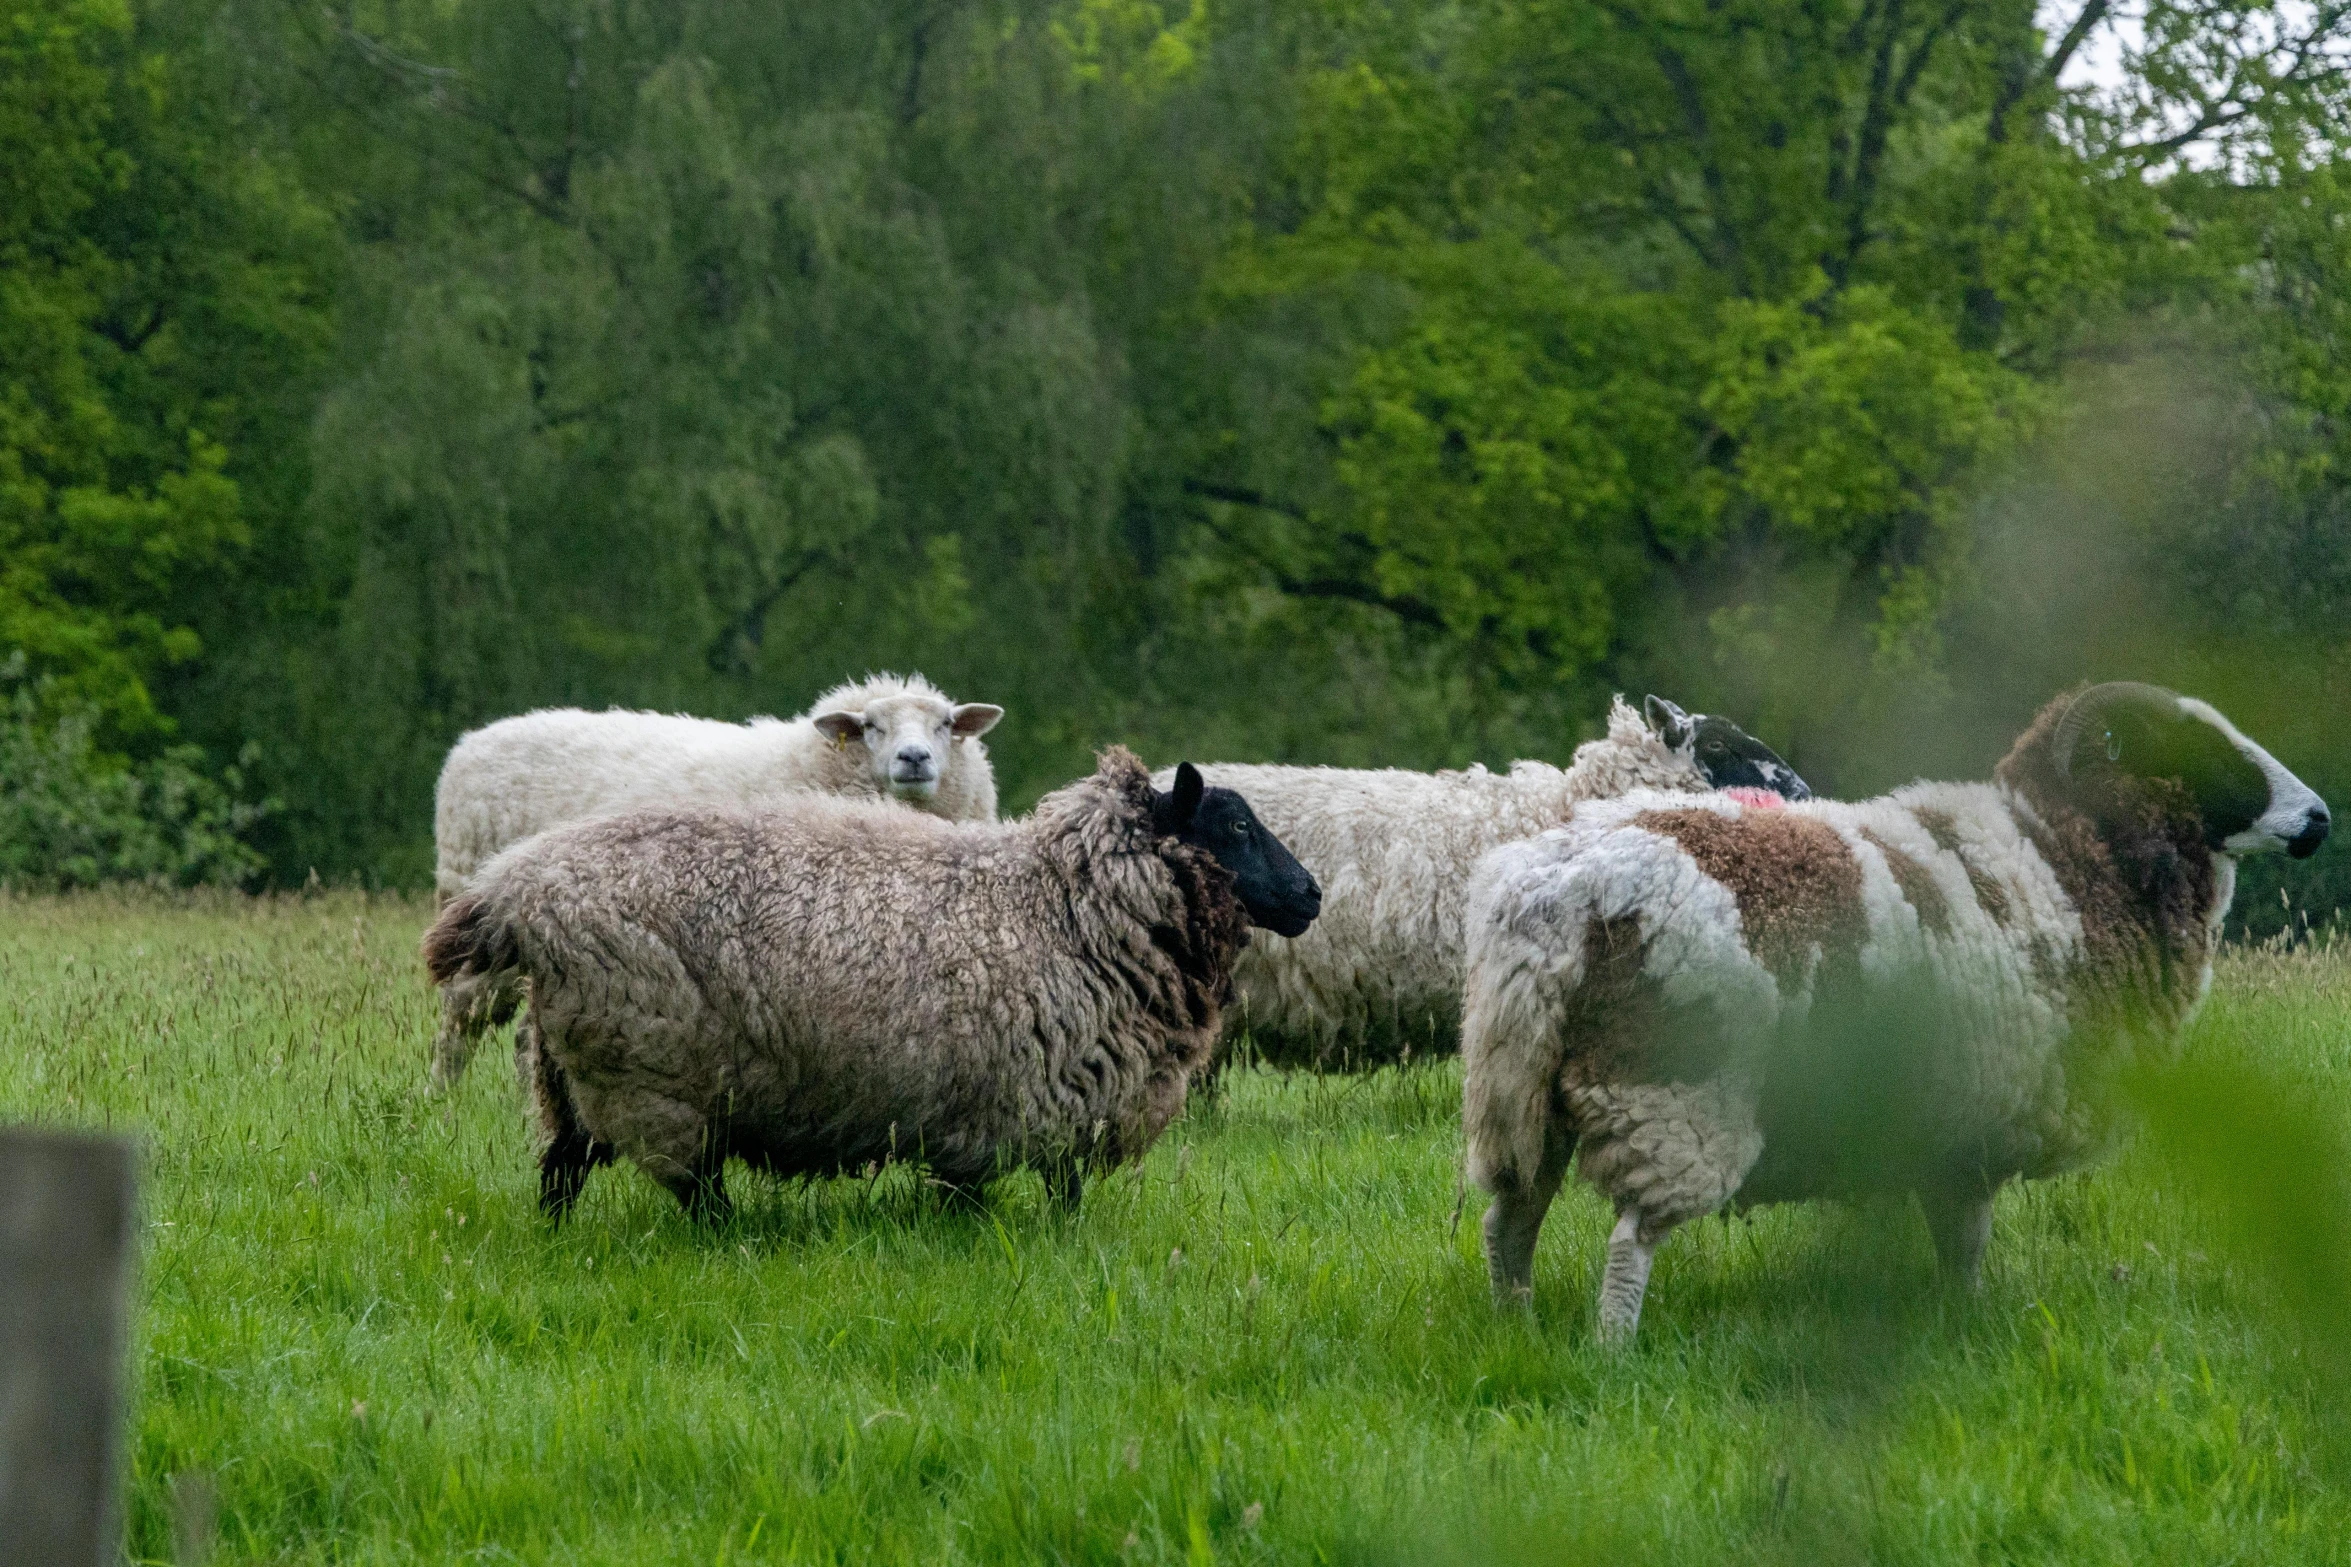 a group of sheep are walking through the field